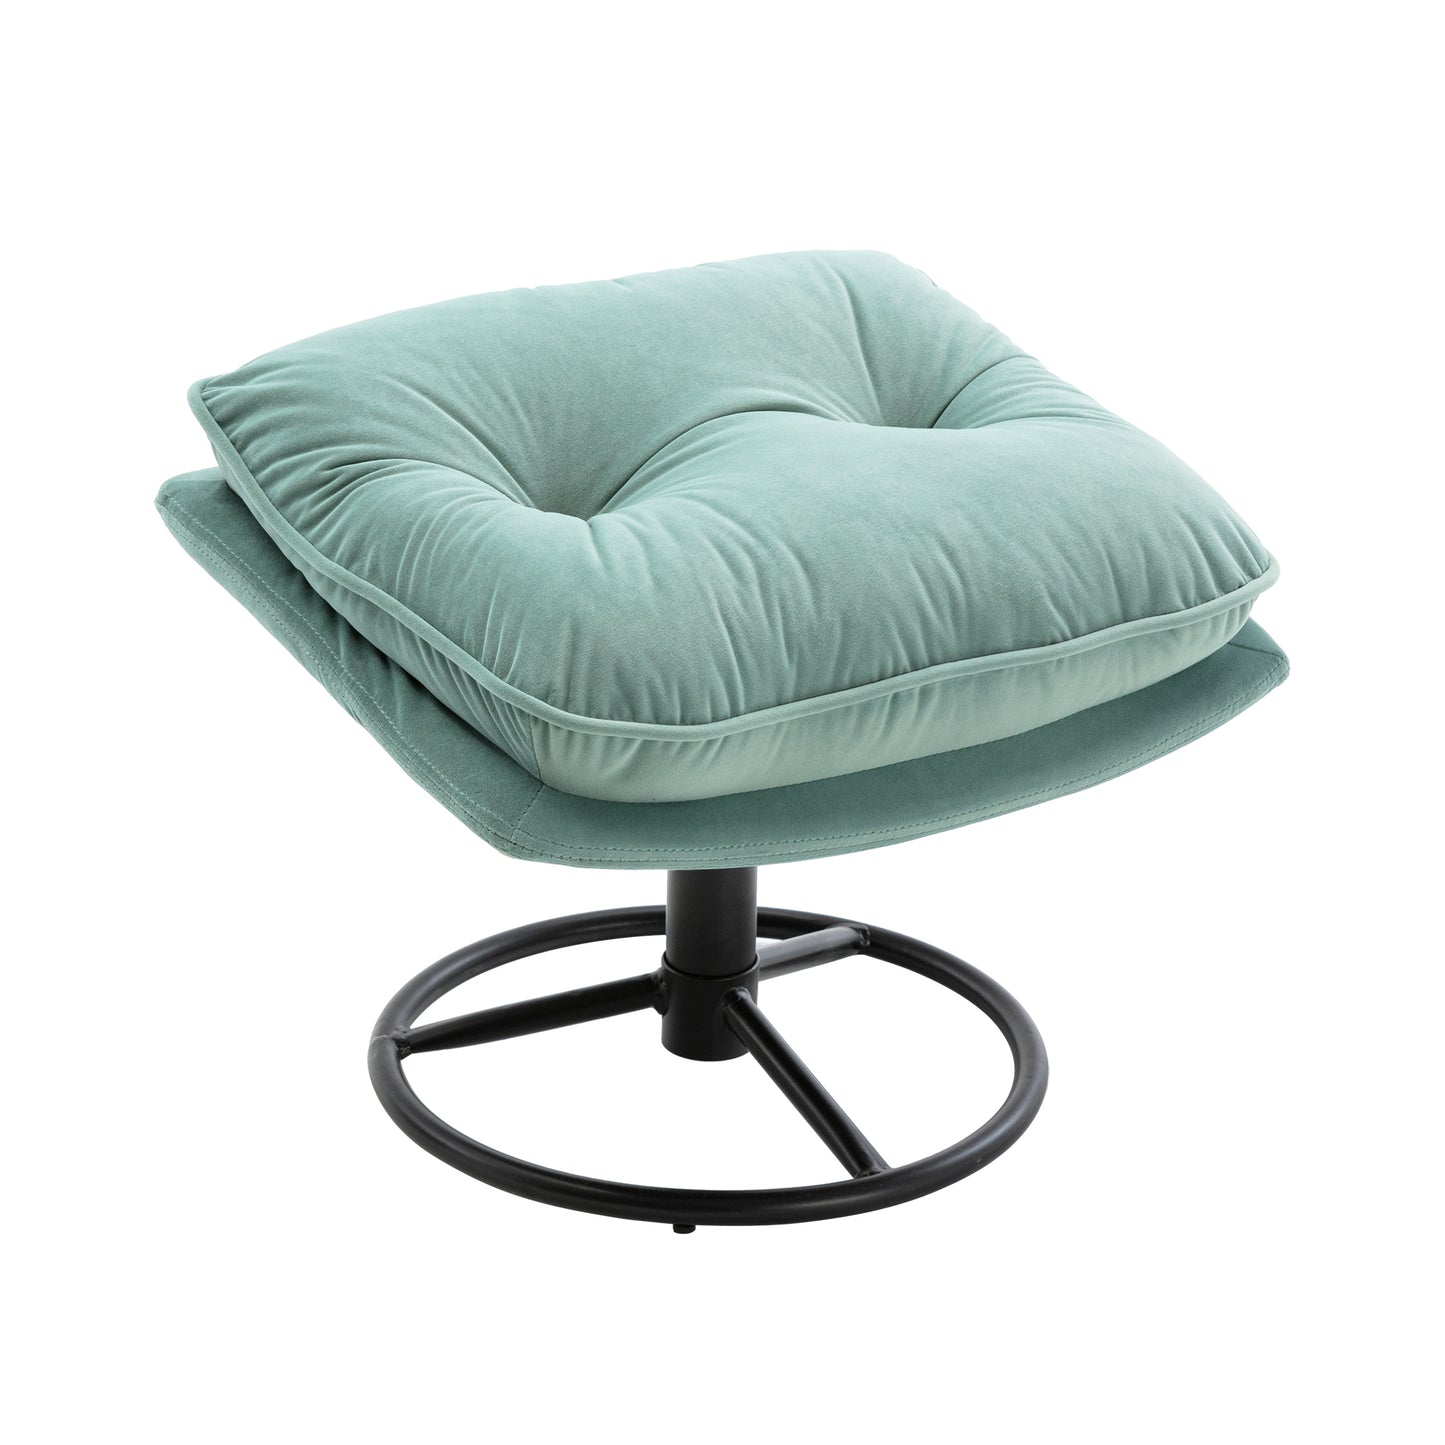 Accent chair  Living room Chair, Ottoman-TEAL